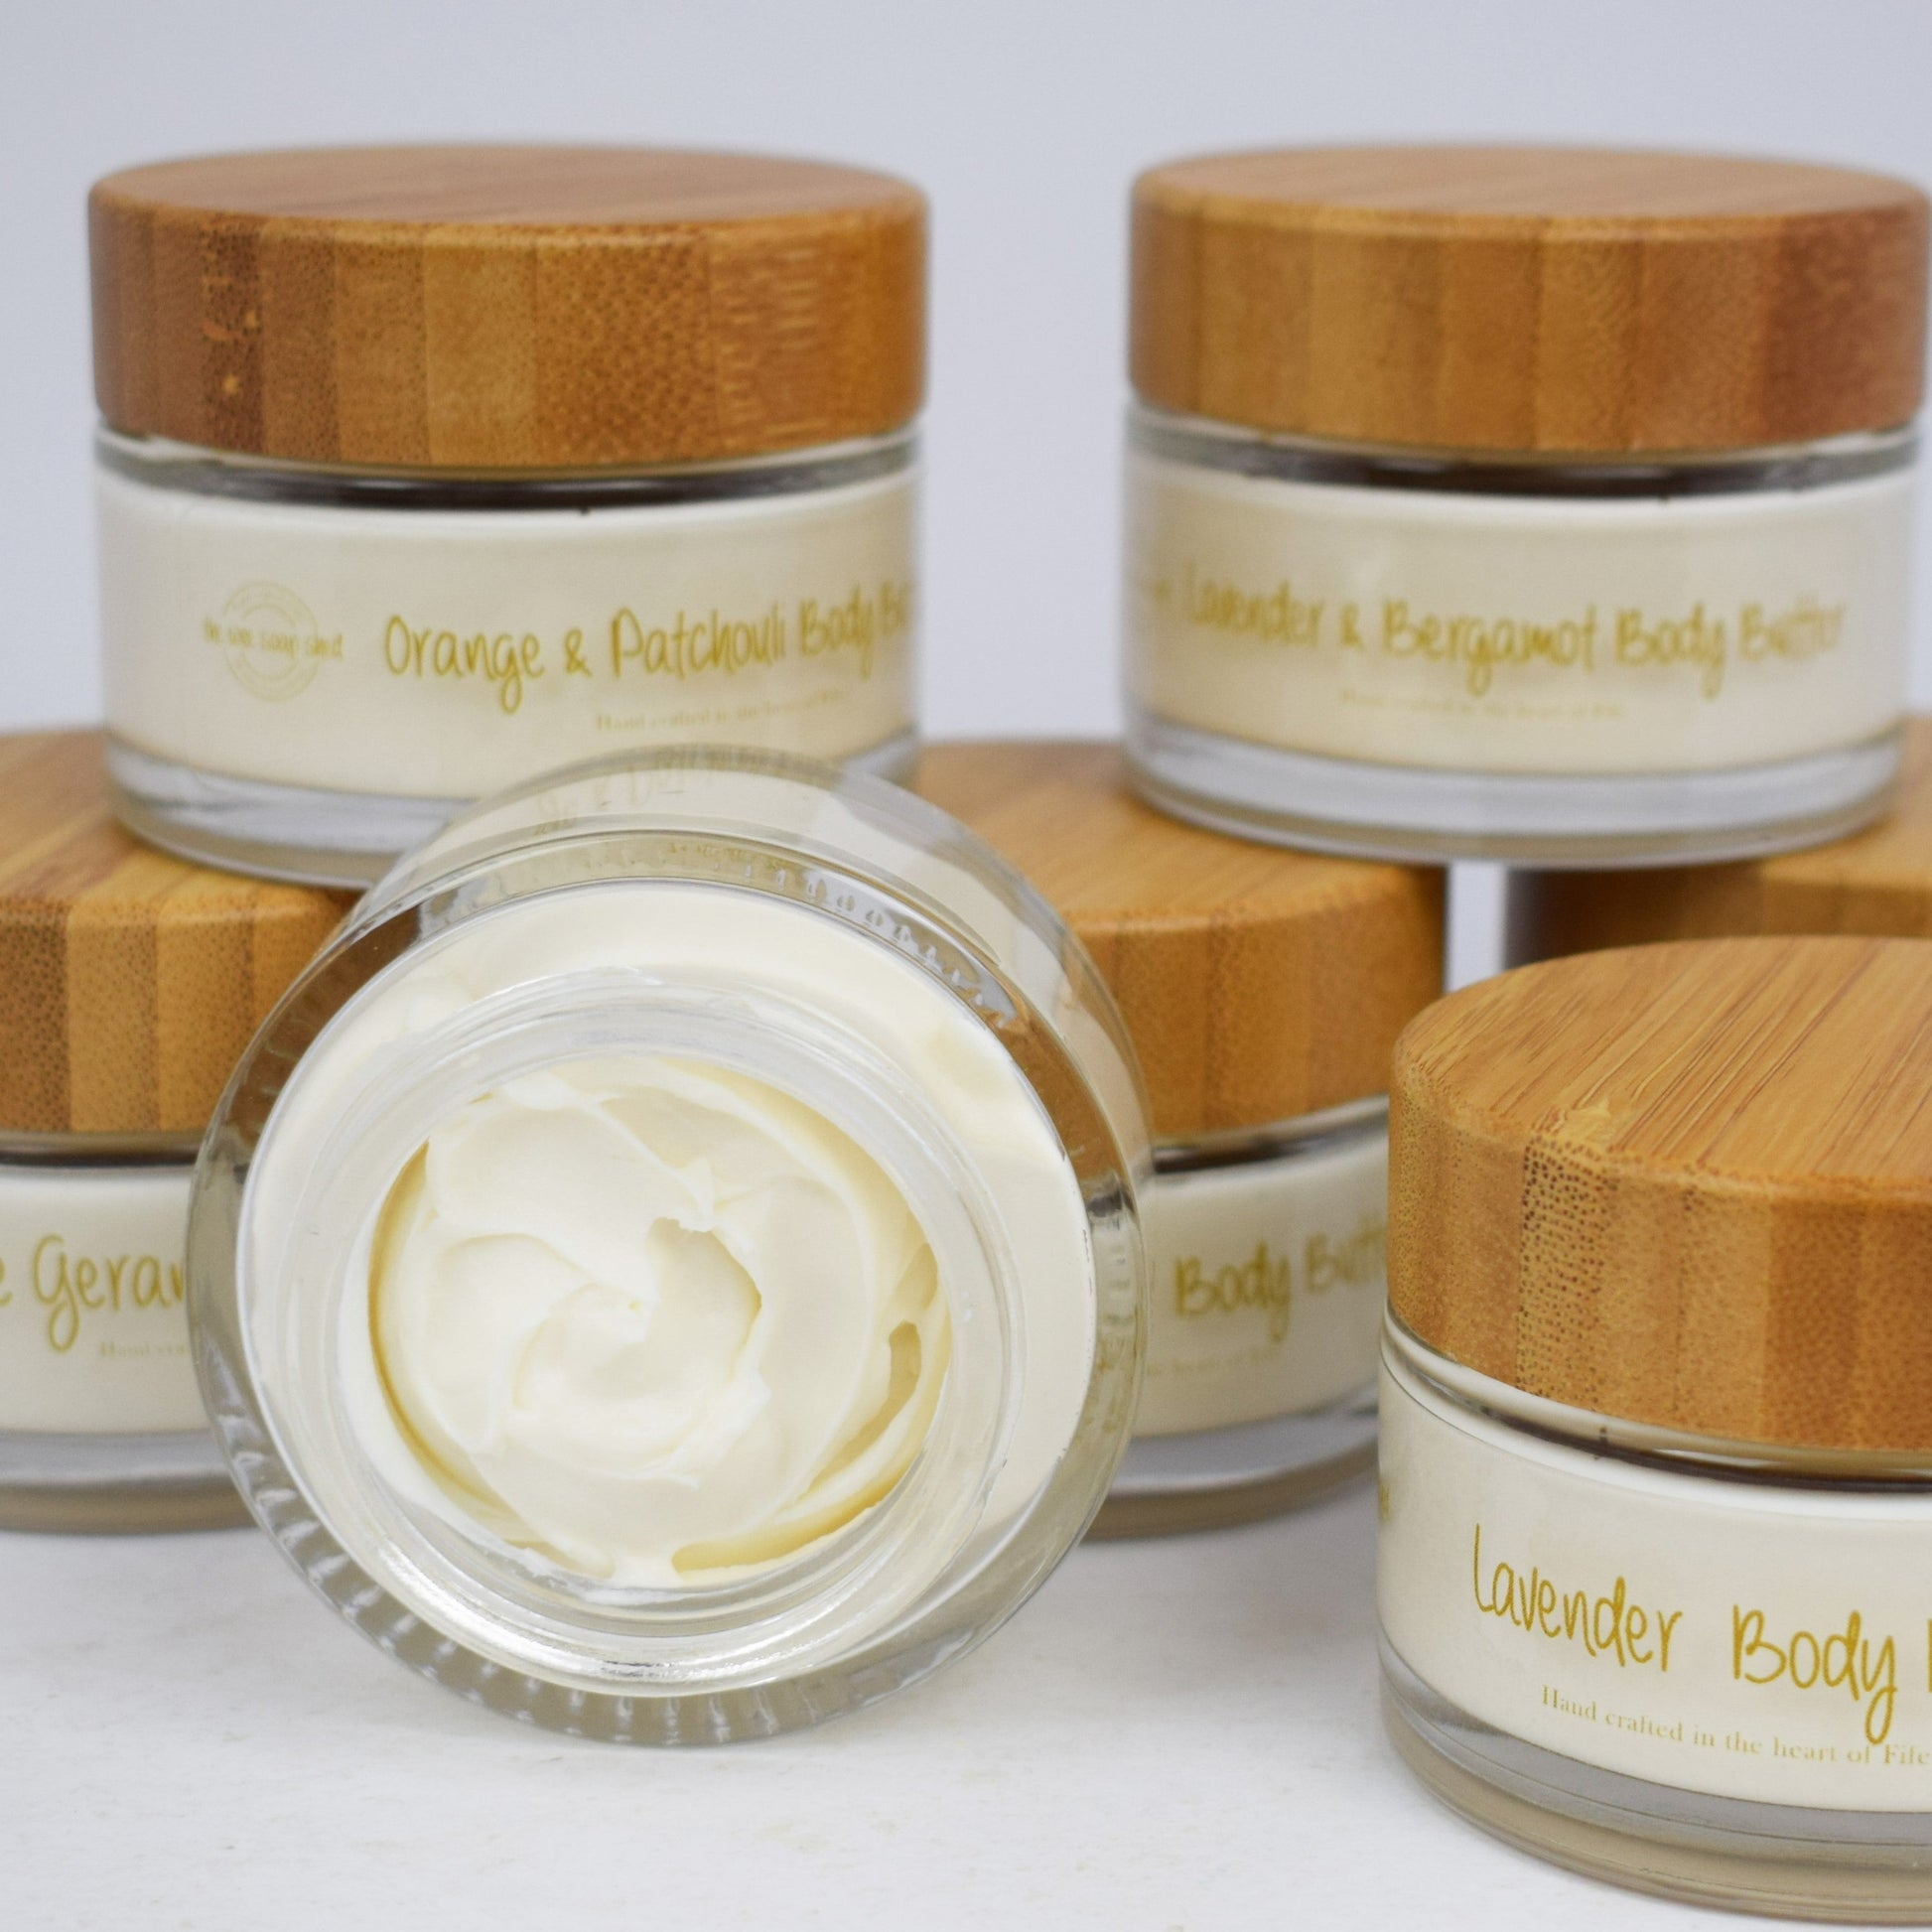 The Wee Soap Shed Body Butter